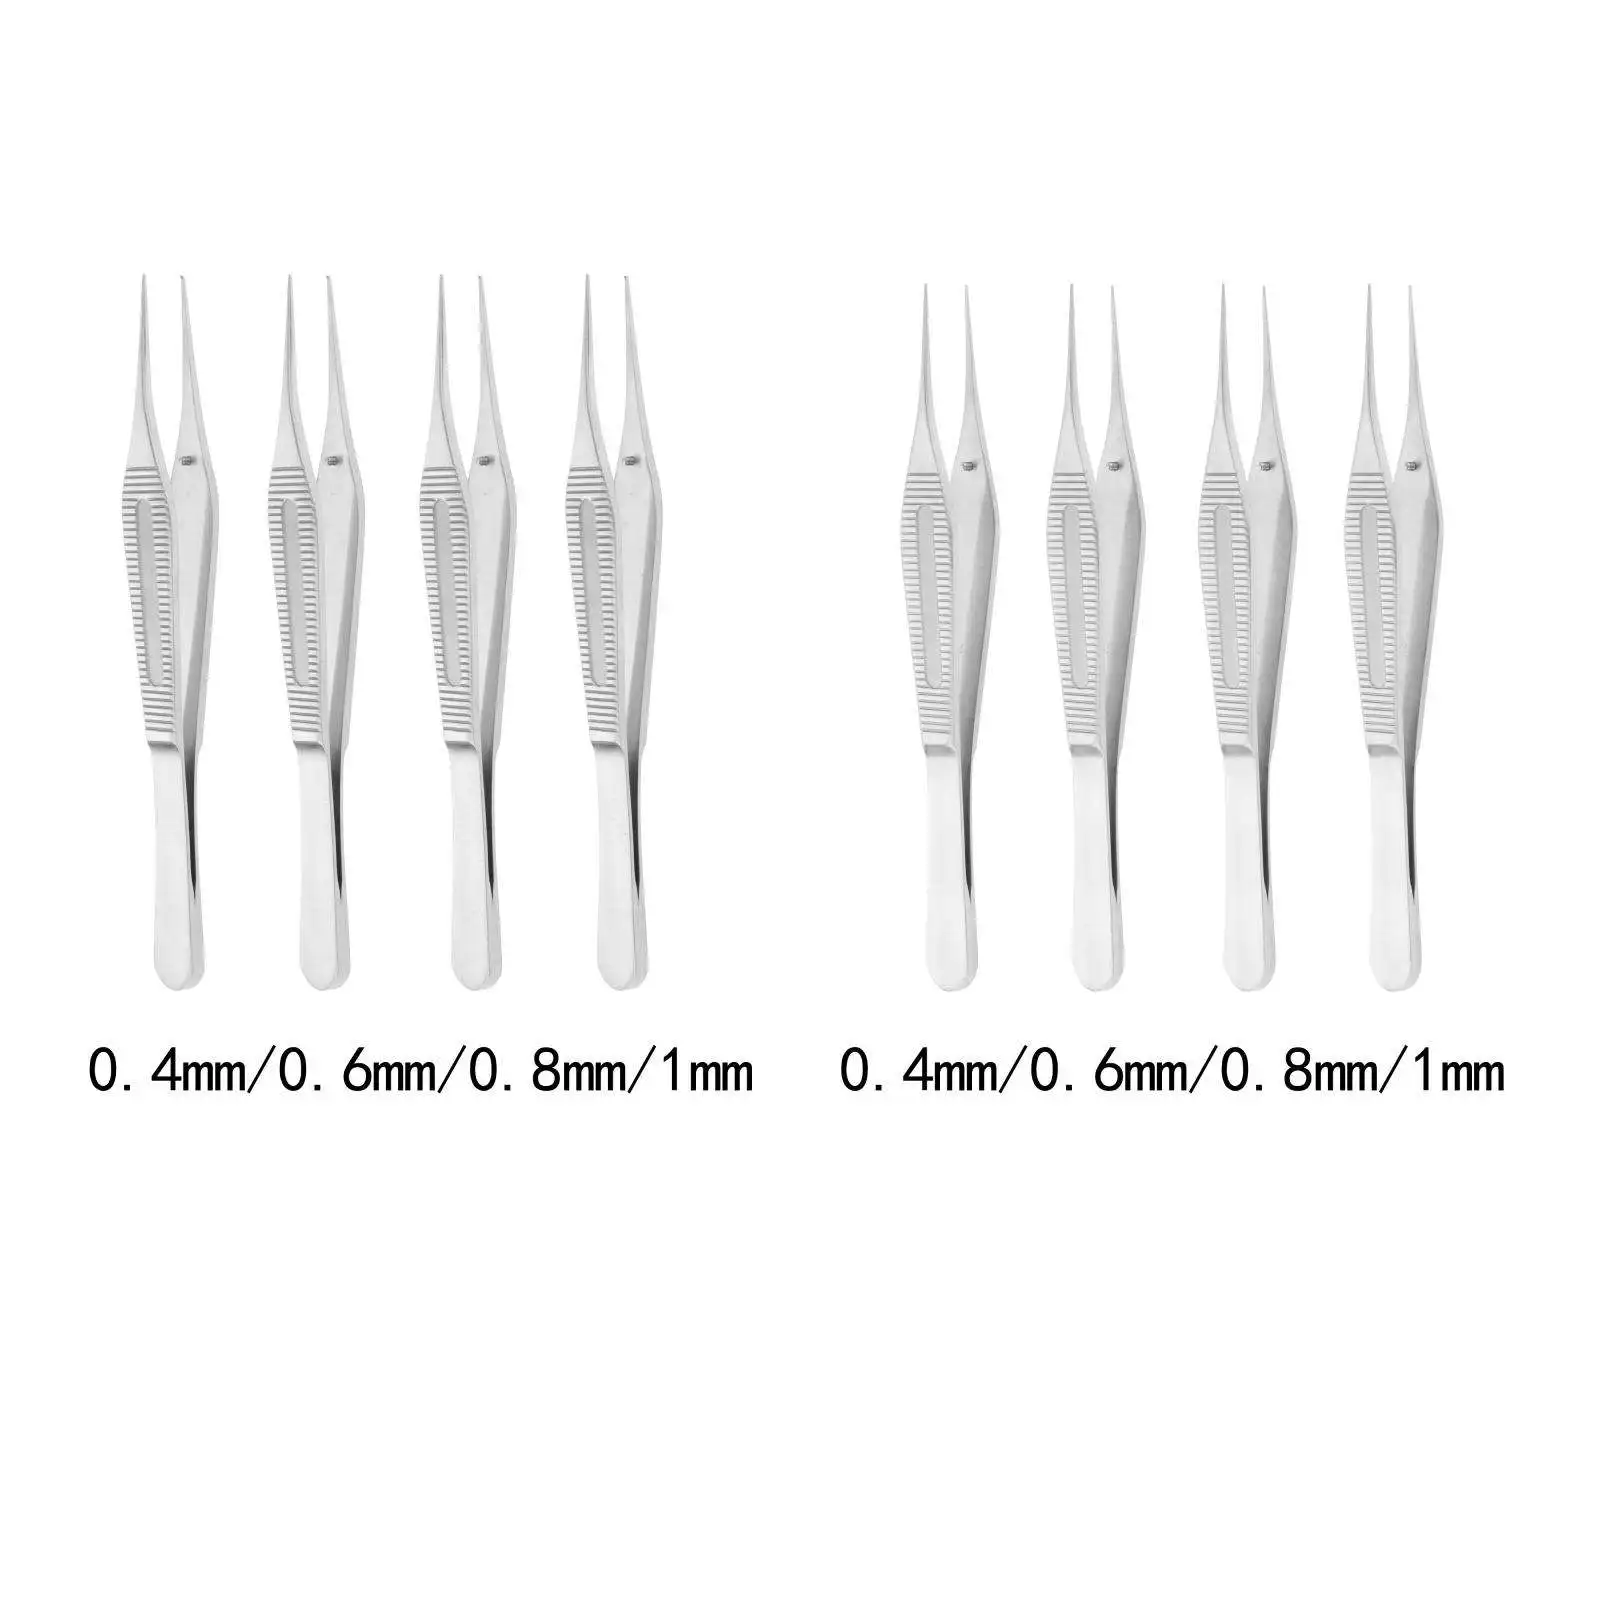 Long Fat Tweezers Durable Pointed Portable Precision Remover Repair Tool for Surgery Facial Hair Cosmetic Microscopes Home Use